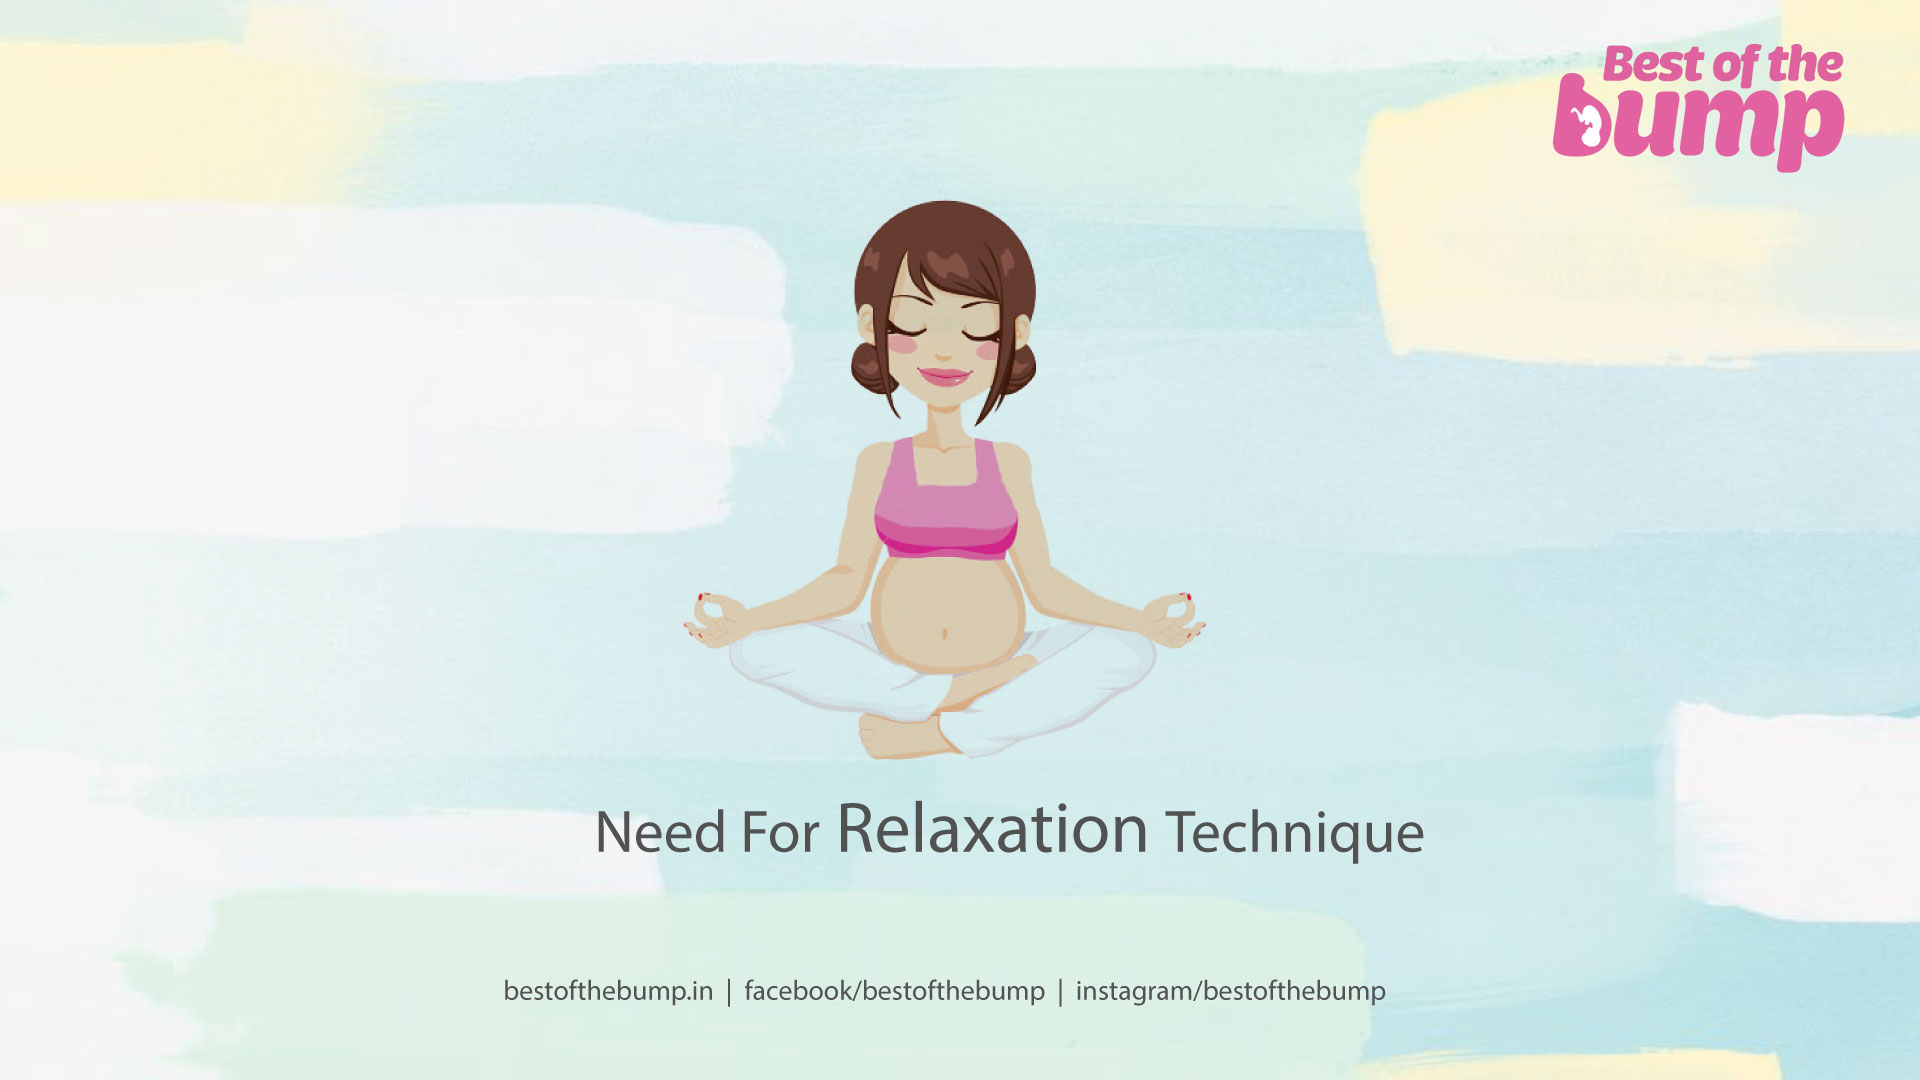 Need For Relaxation Technique